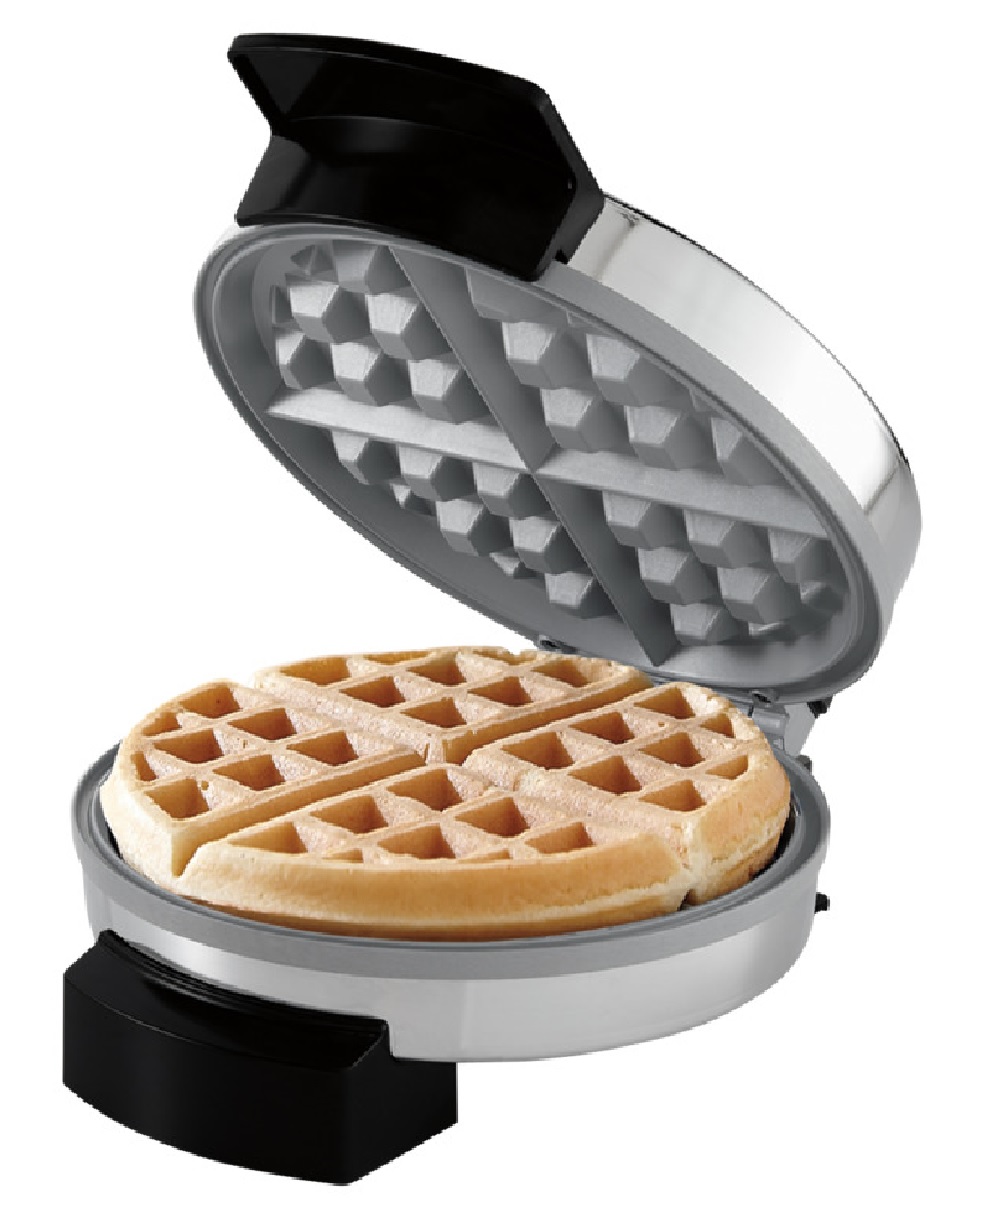 Oster 2109989 Waffle Maker, 10 Inch x 5 Inch, Silver - image 1 of 5